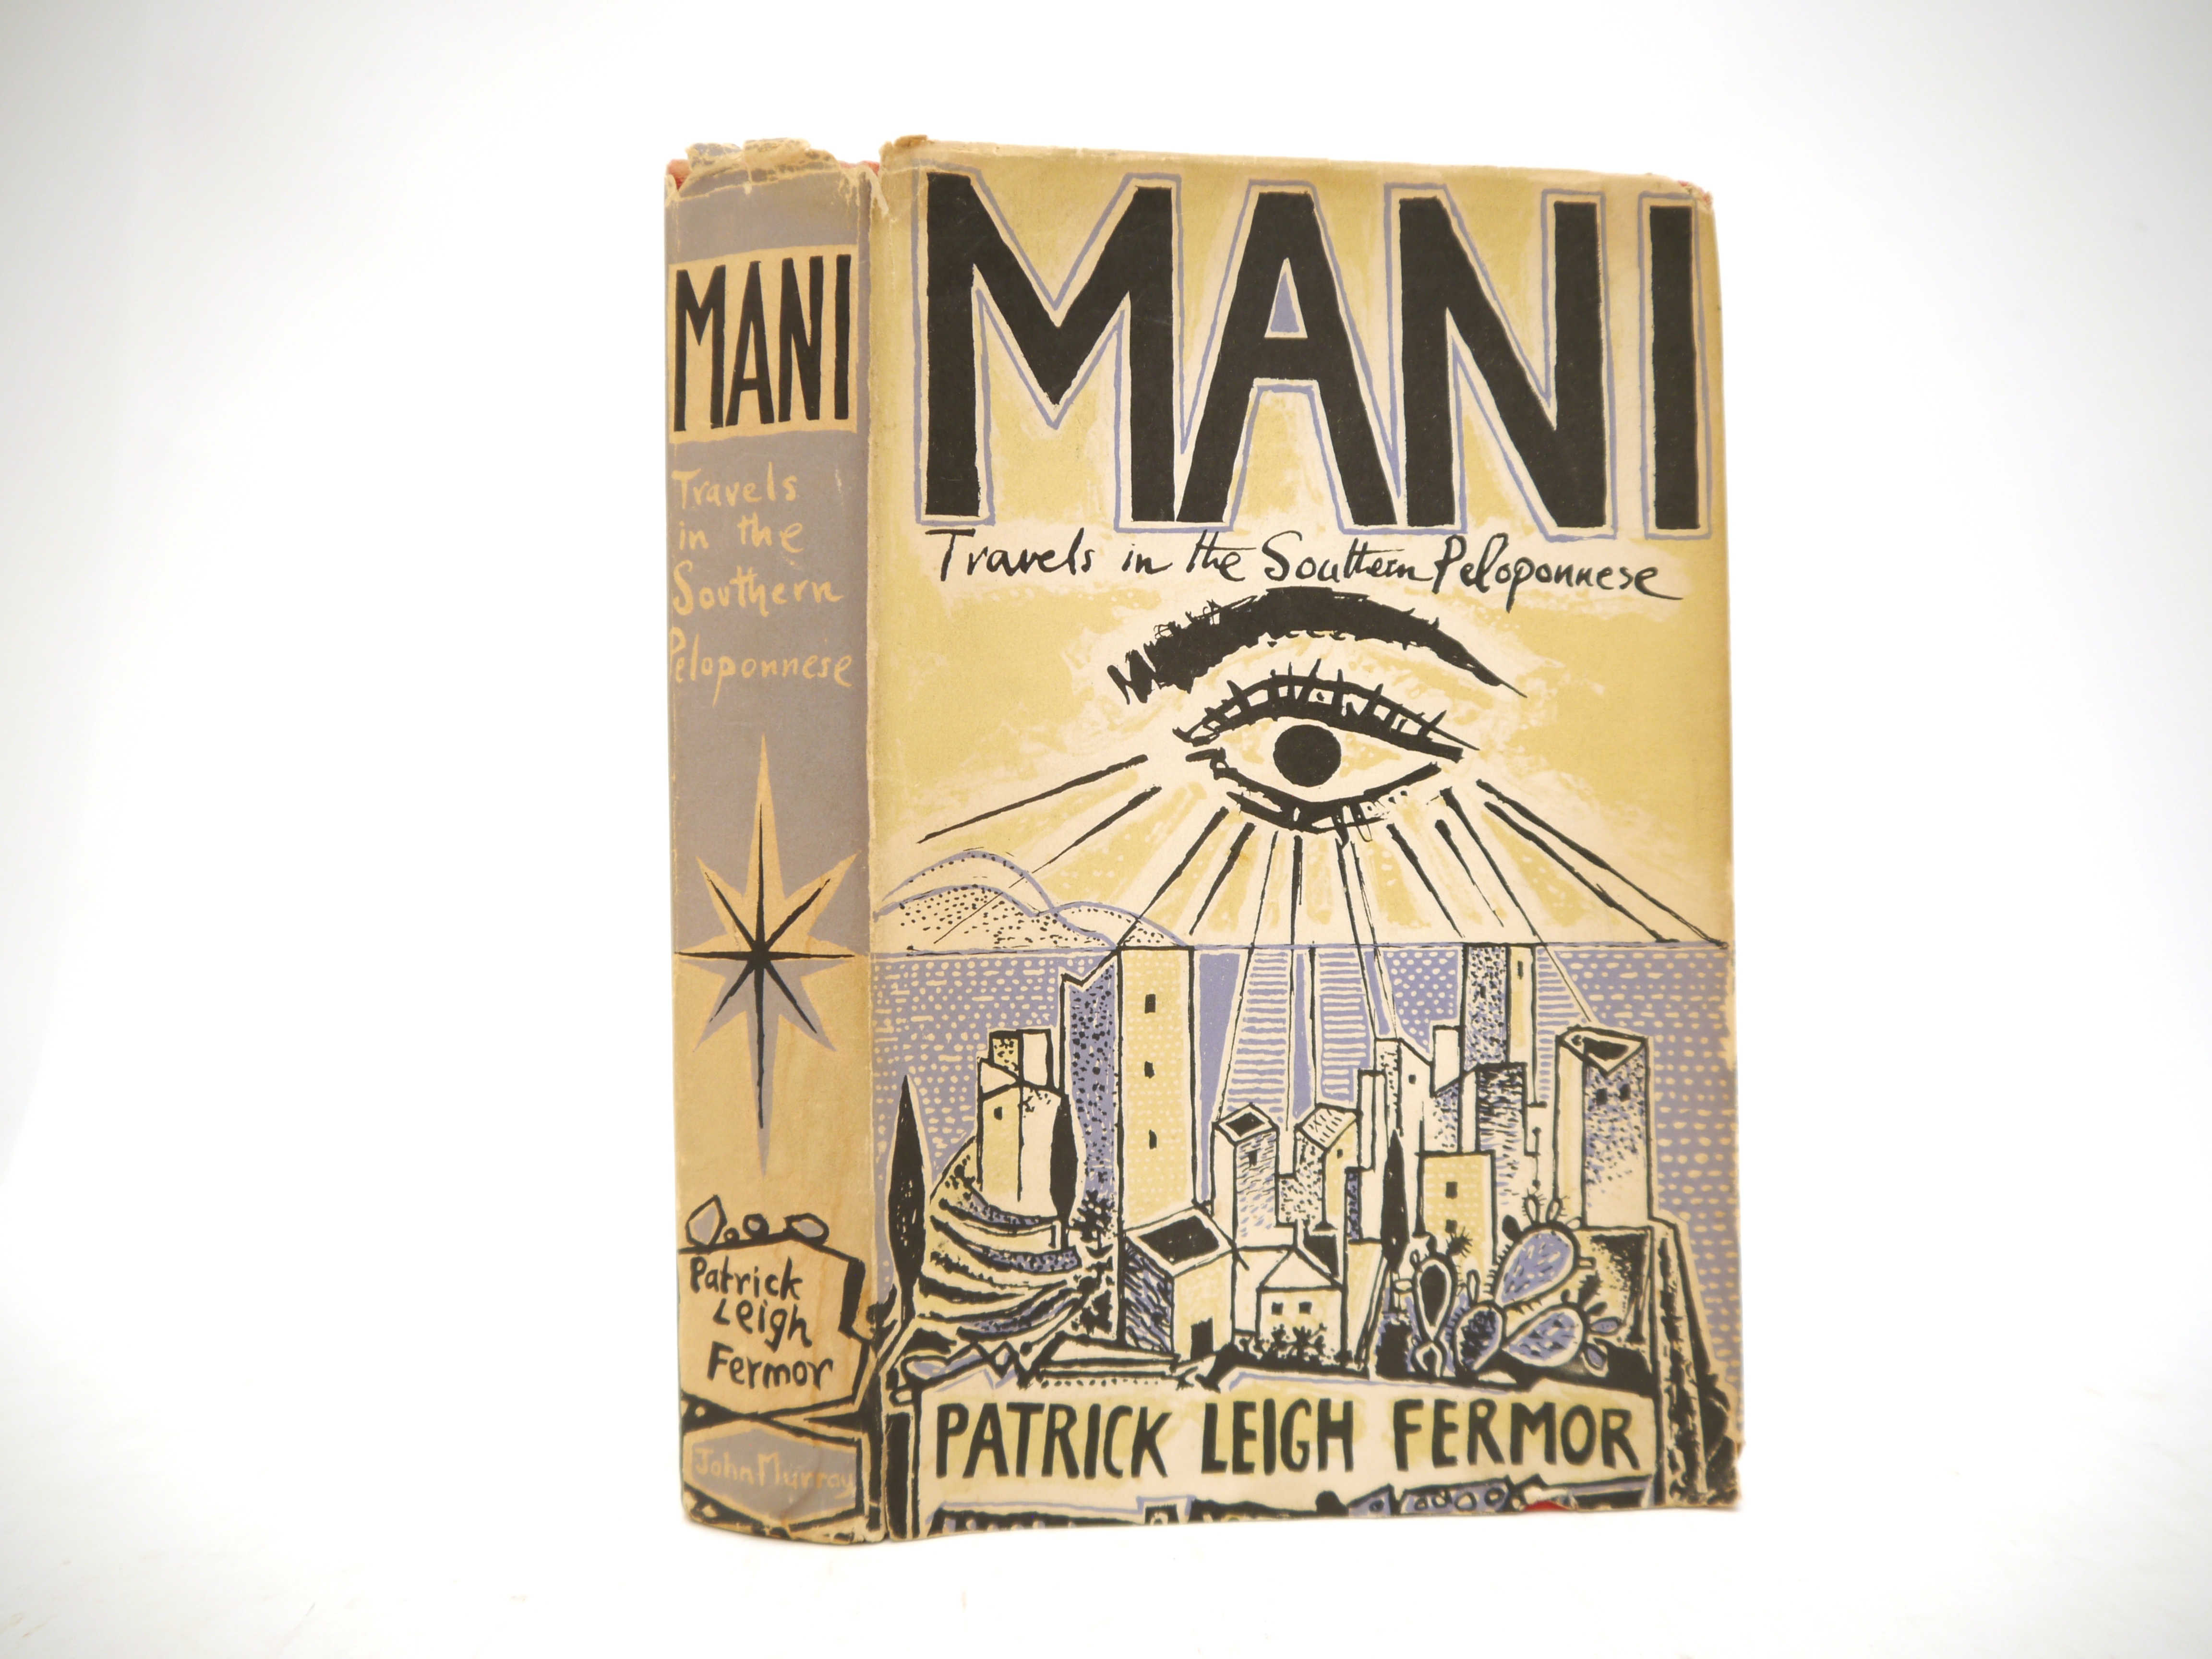 Patrick Leigh Fermor: 'Mani: Travels in the Southern Peloponnese', London, John Murray, 1958, 1st